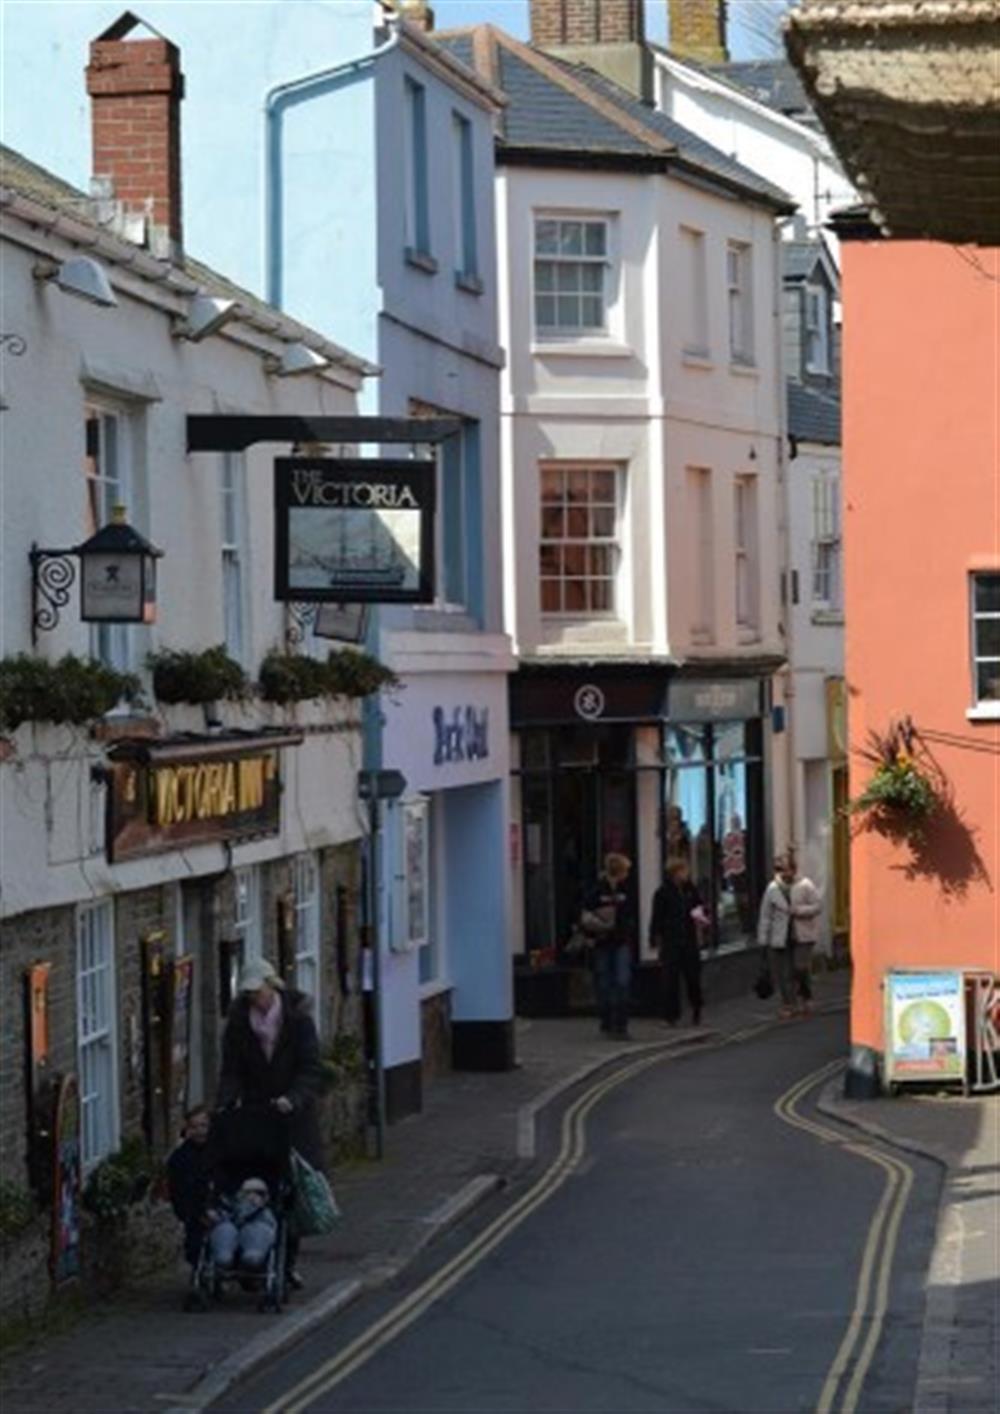 Salcombe Fore Street is bustling with pubs, restaurants, delicatessens and boutique shops at Genoa in Salcombe